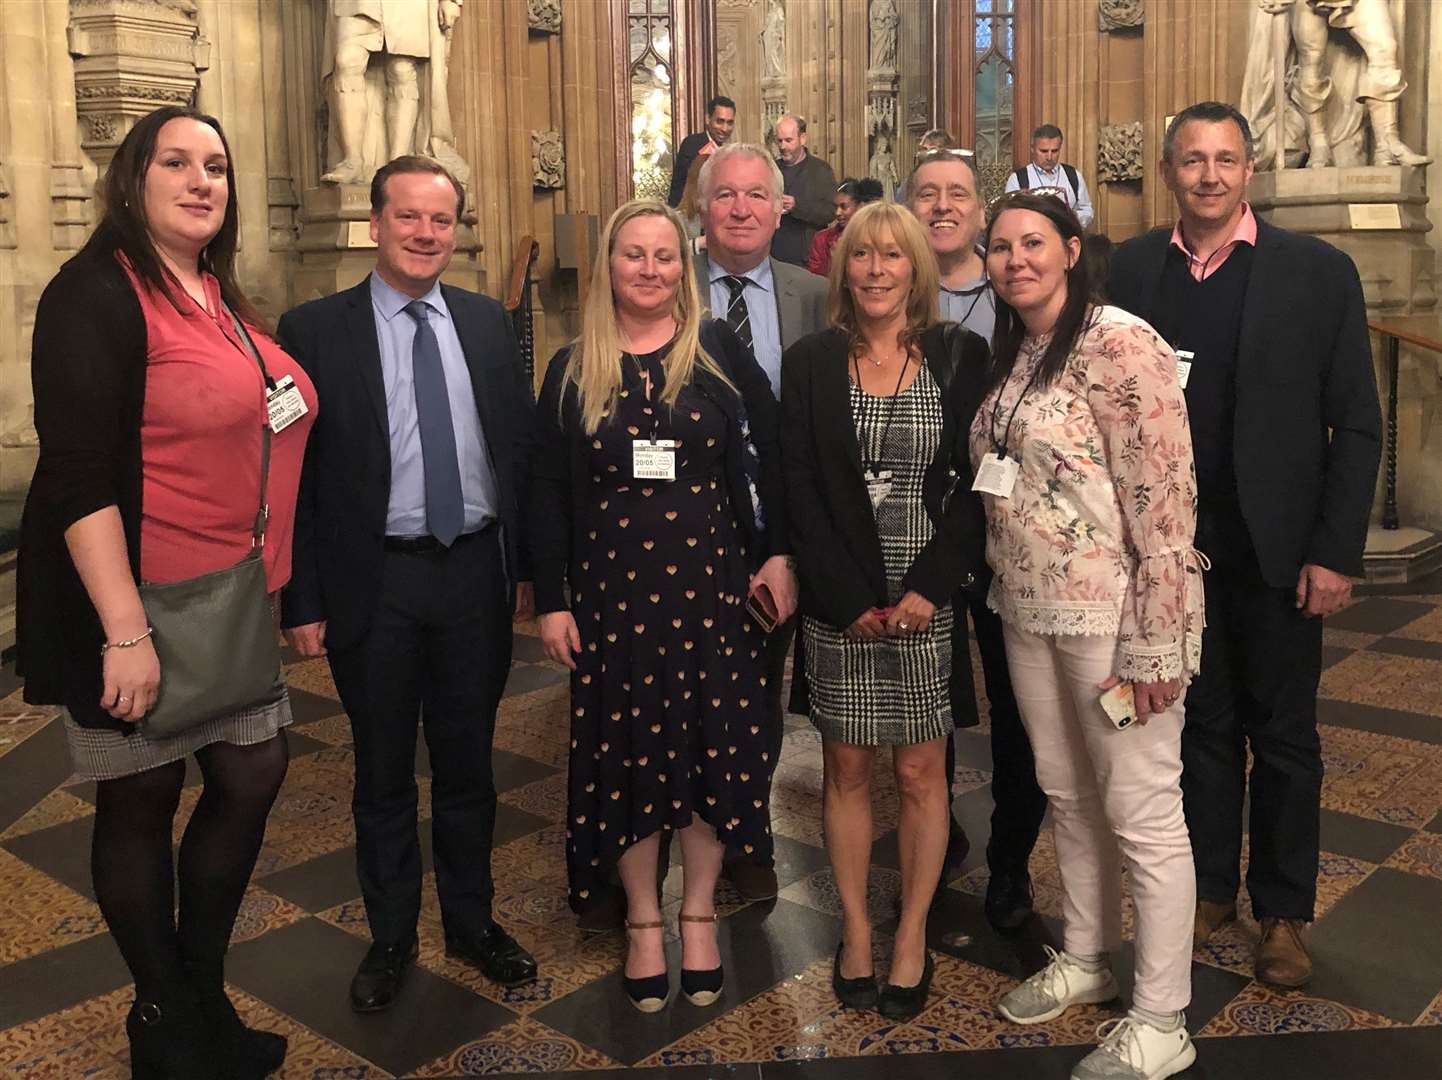 Emma Appleby (far left) wih Charlie Elphicke MP and fellow campaigners at the House of Commons (10820002)